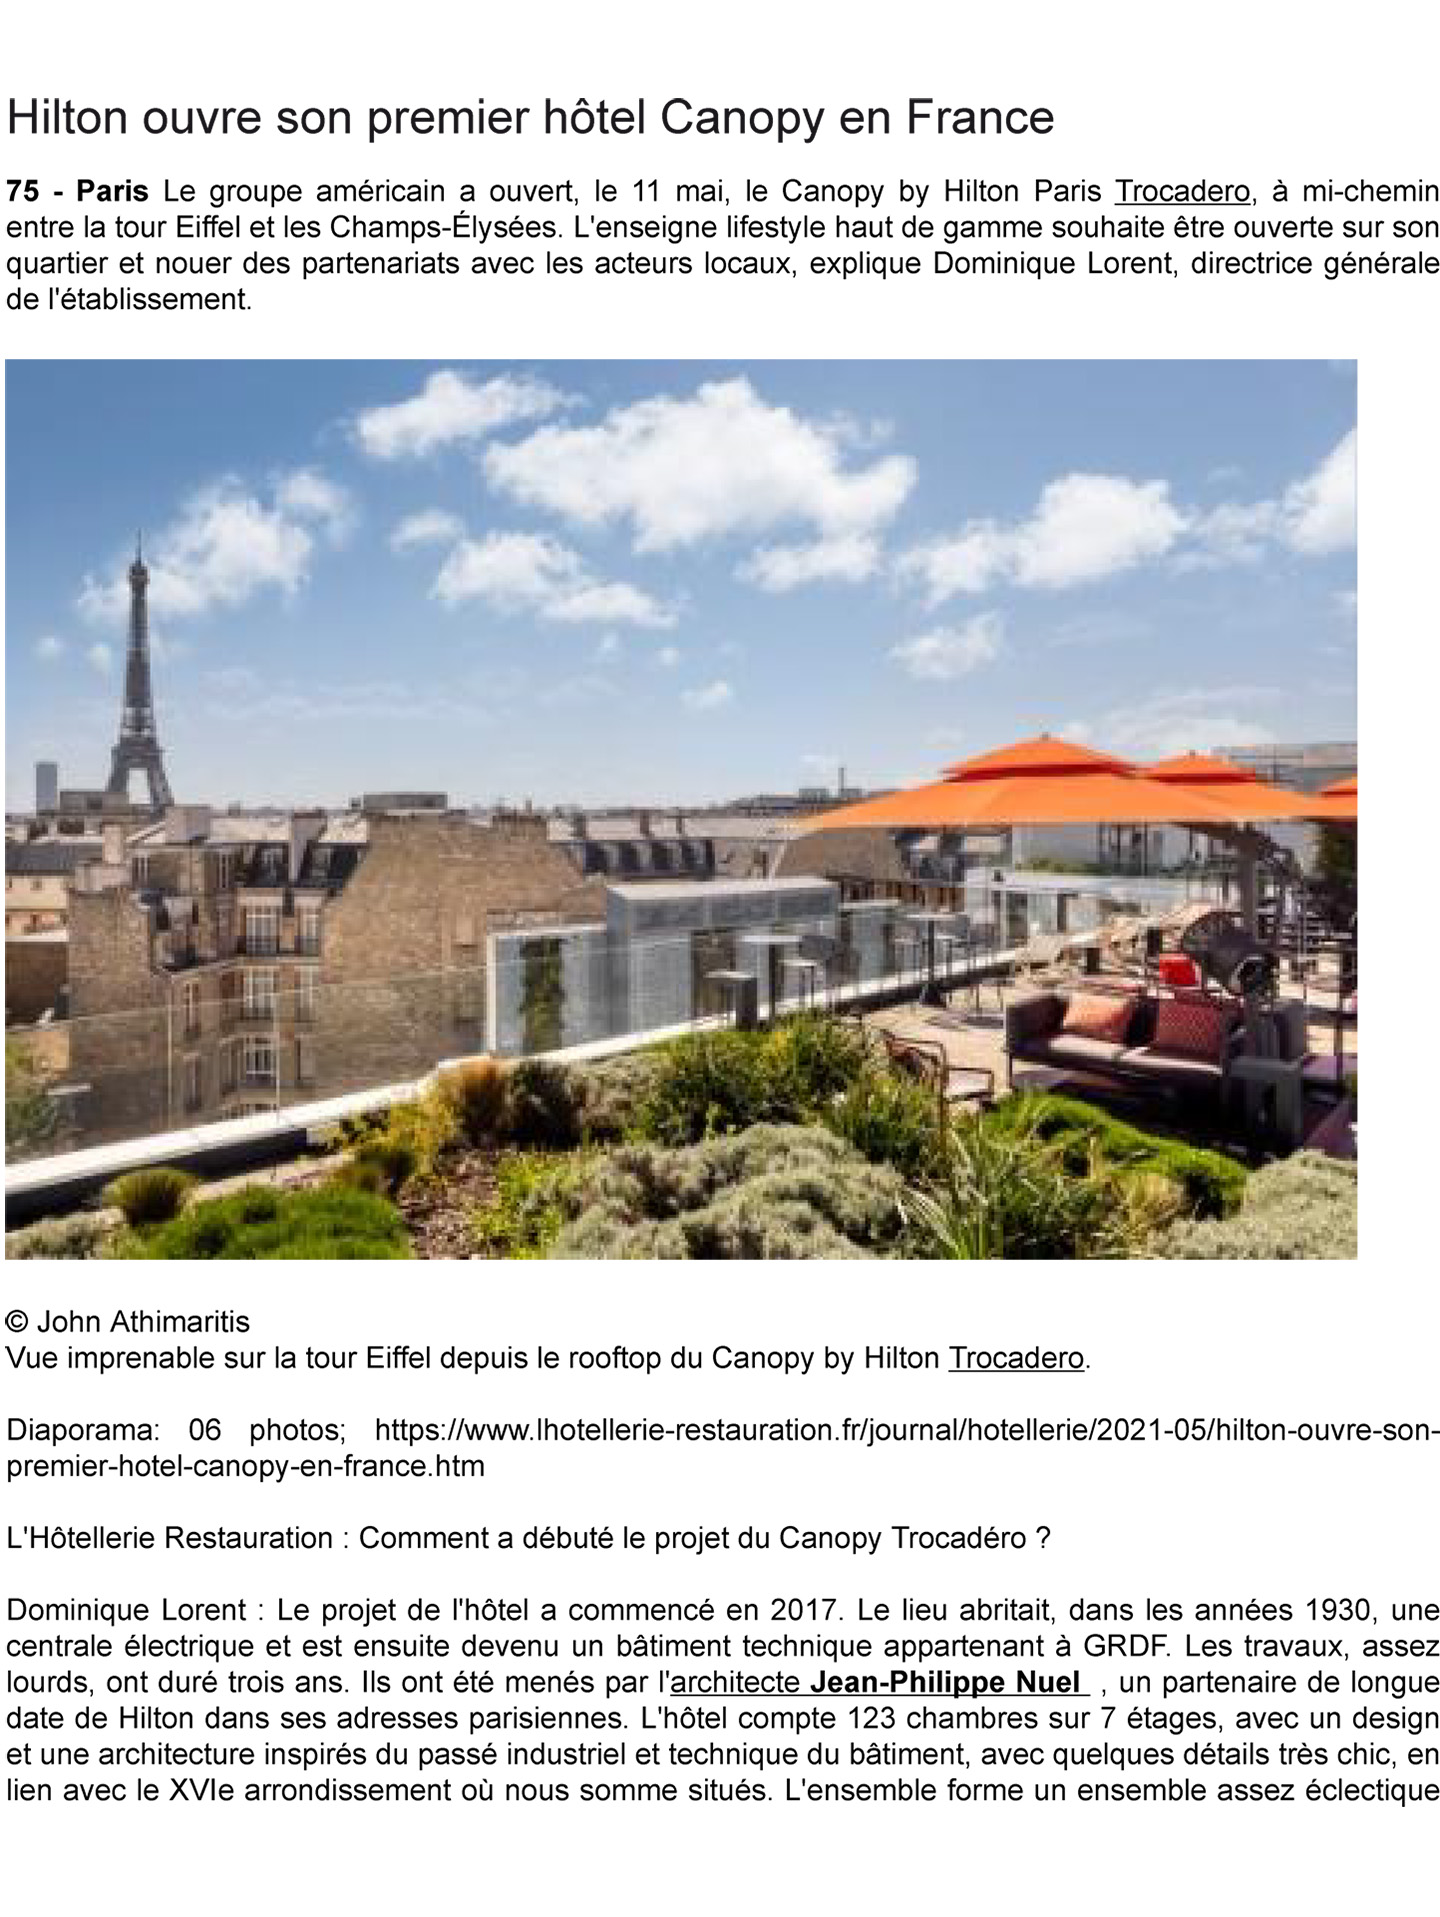 Article on the Canopy by Hilton Paris Trocadero realized by the studio jean-Philippe Nuel in the magazine l'hotellerie restauration, new hotel lifestyle, luxury interior design